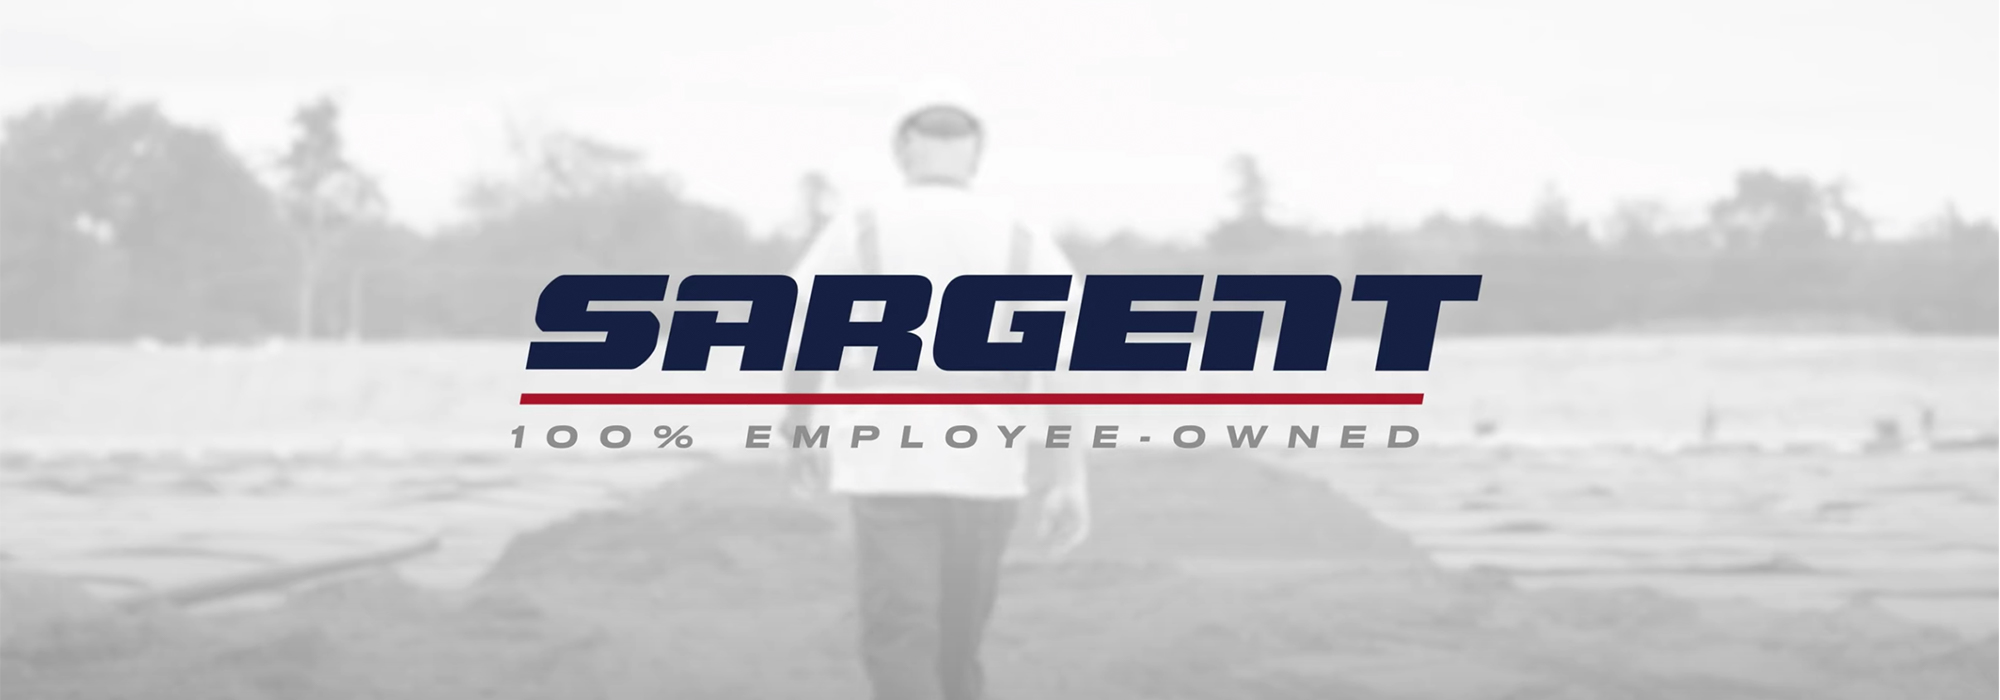 Sargent 100% Employee Owned